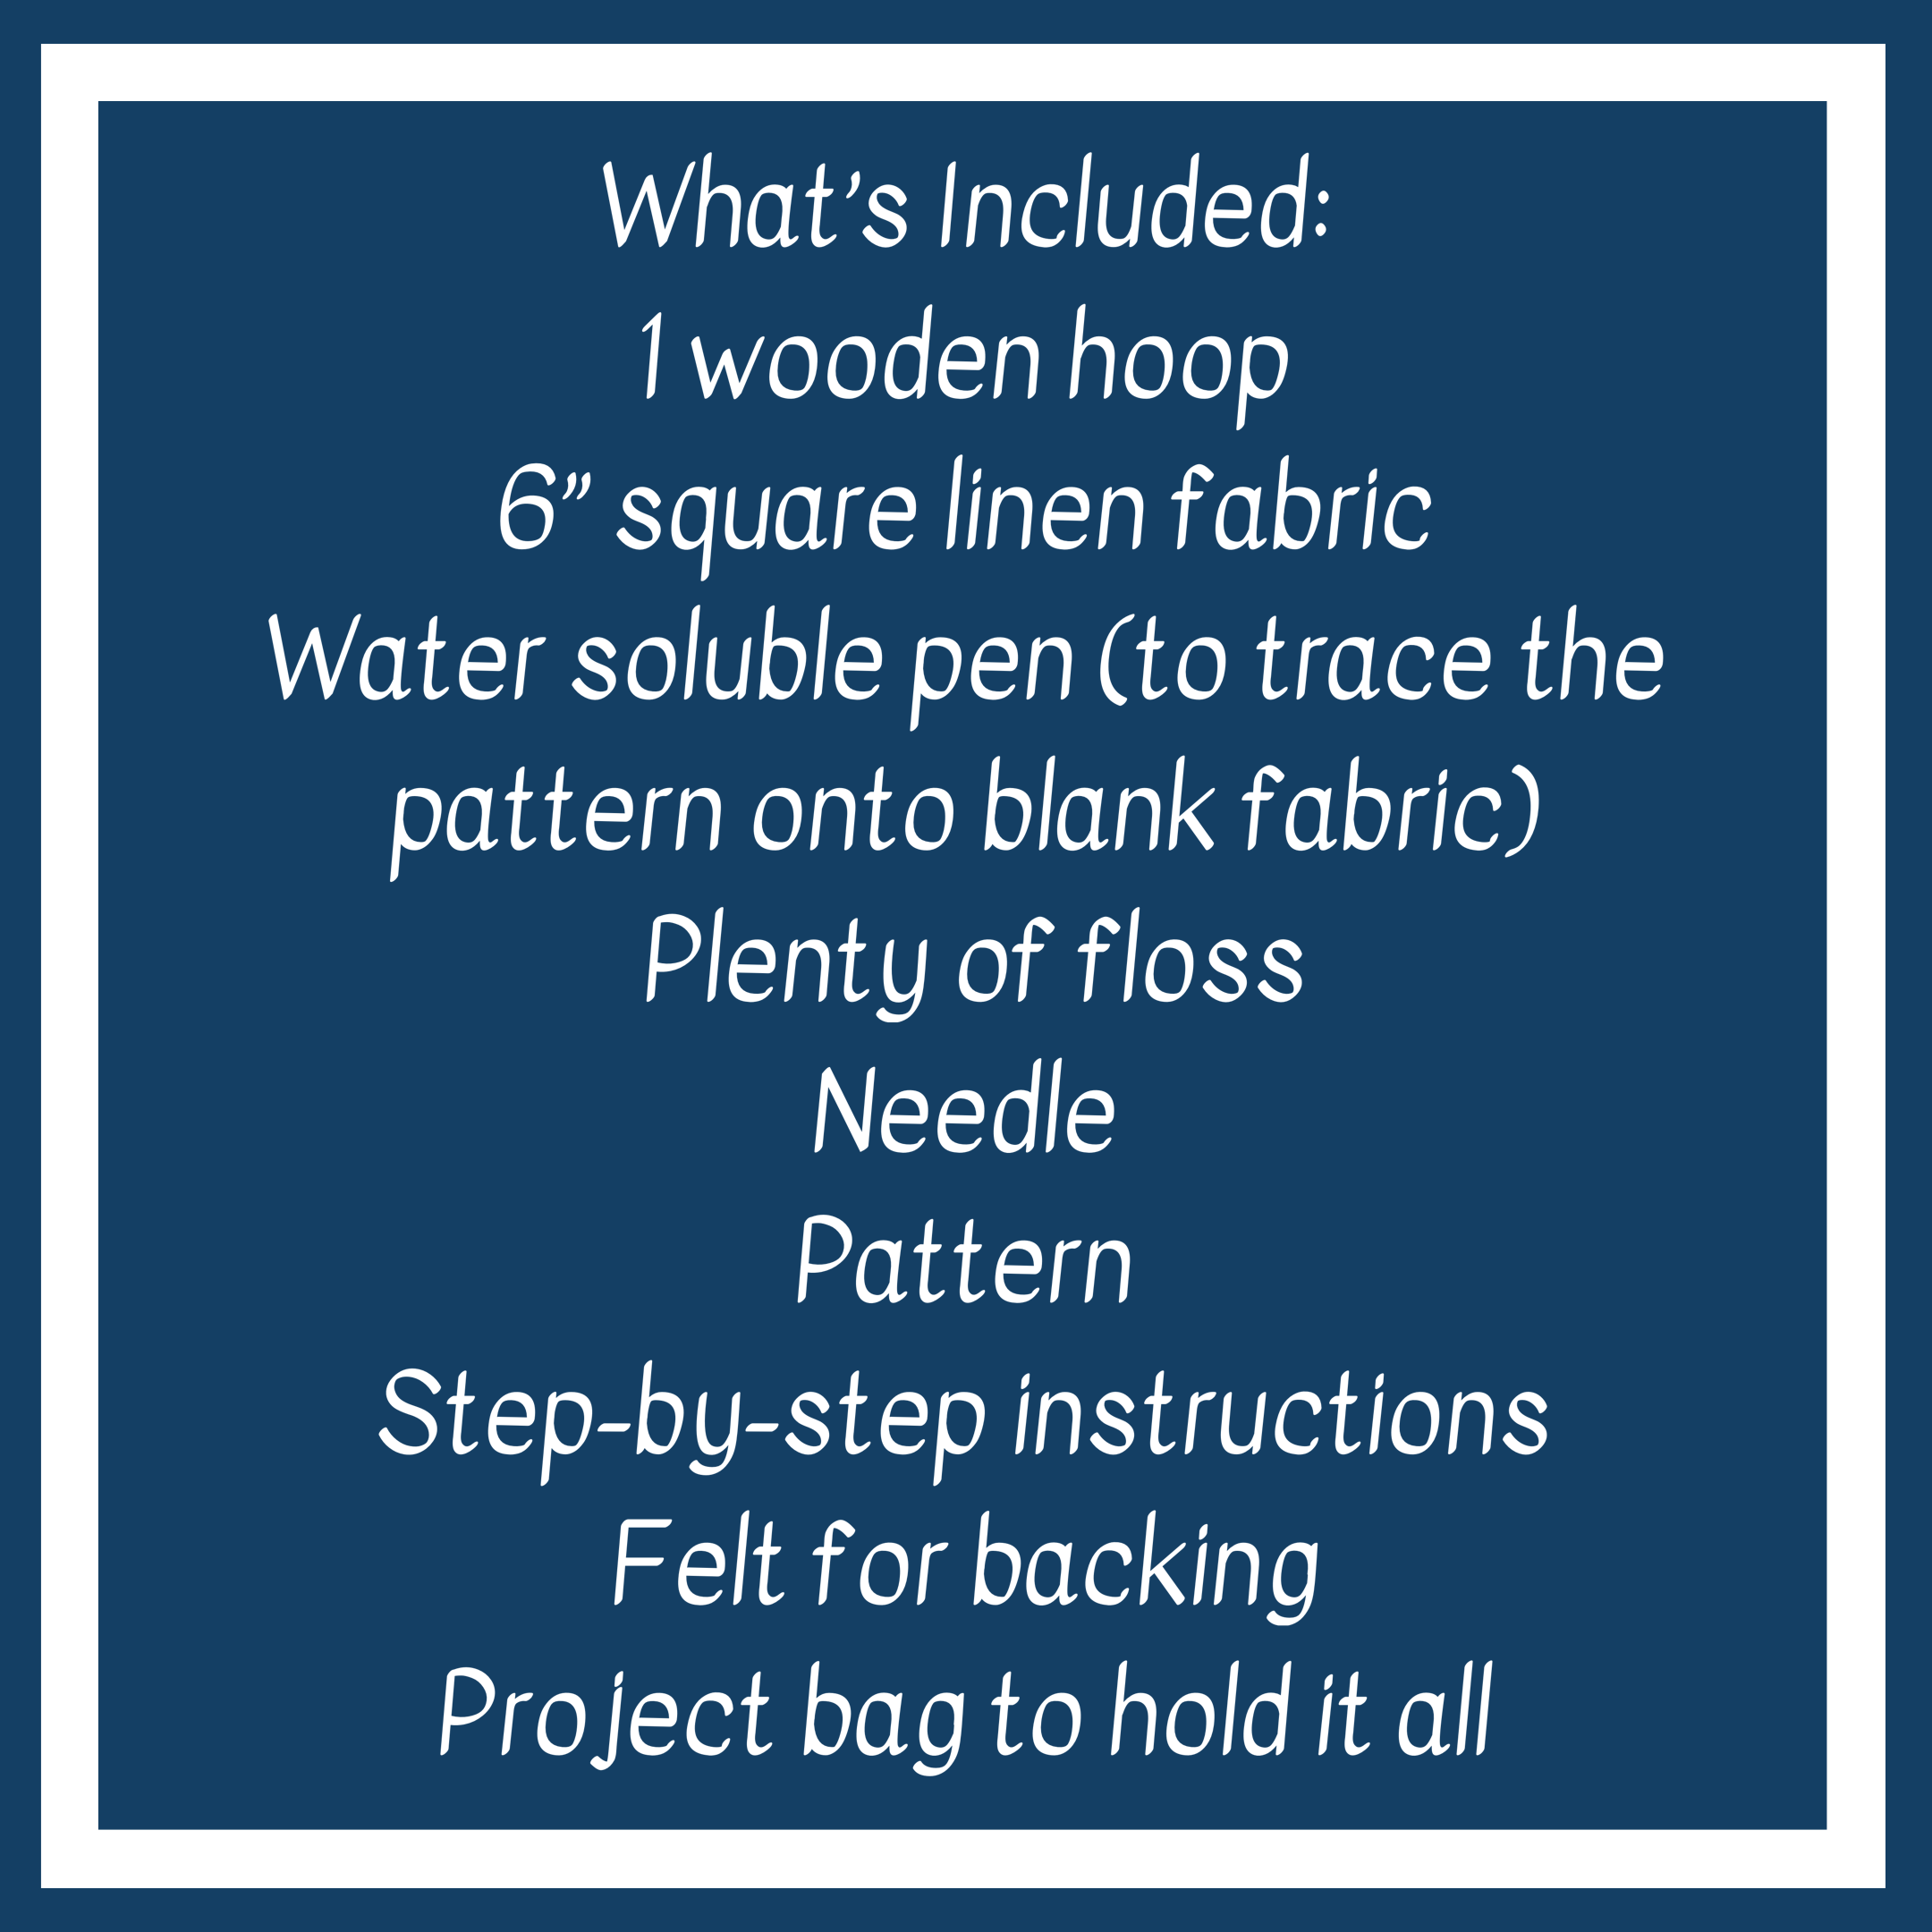 what's included in the  embroidery kit